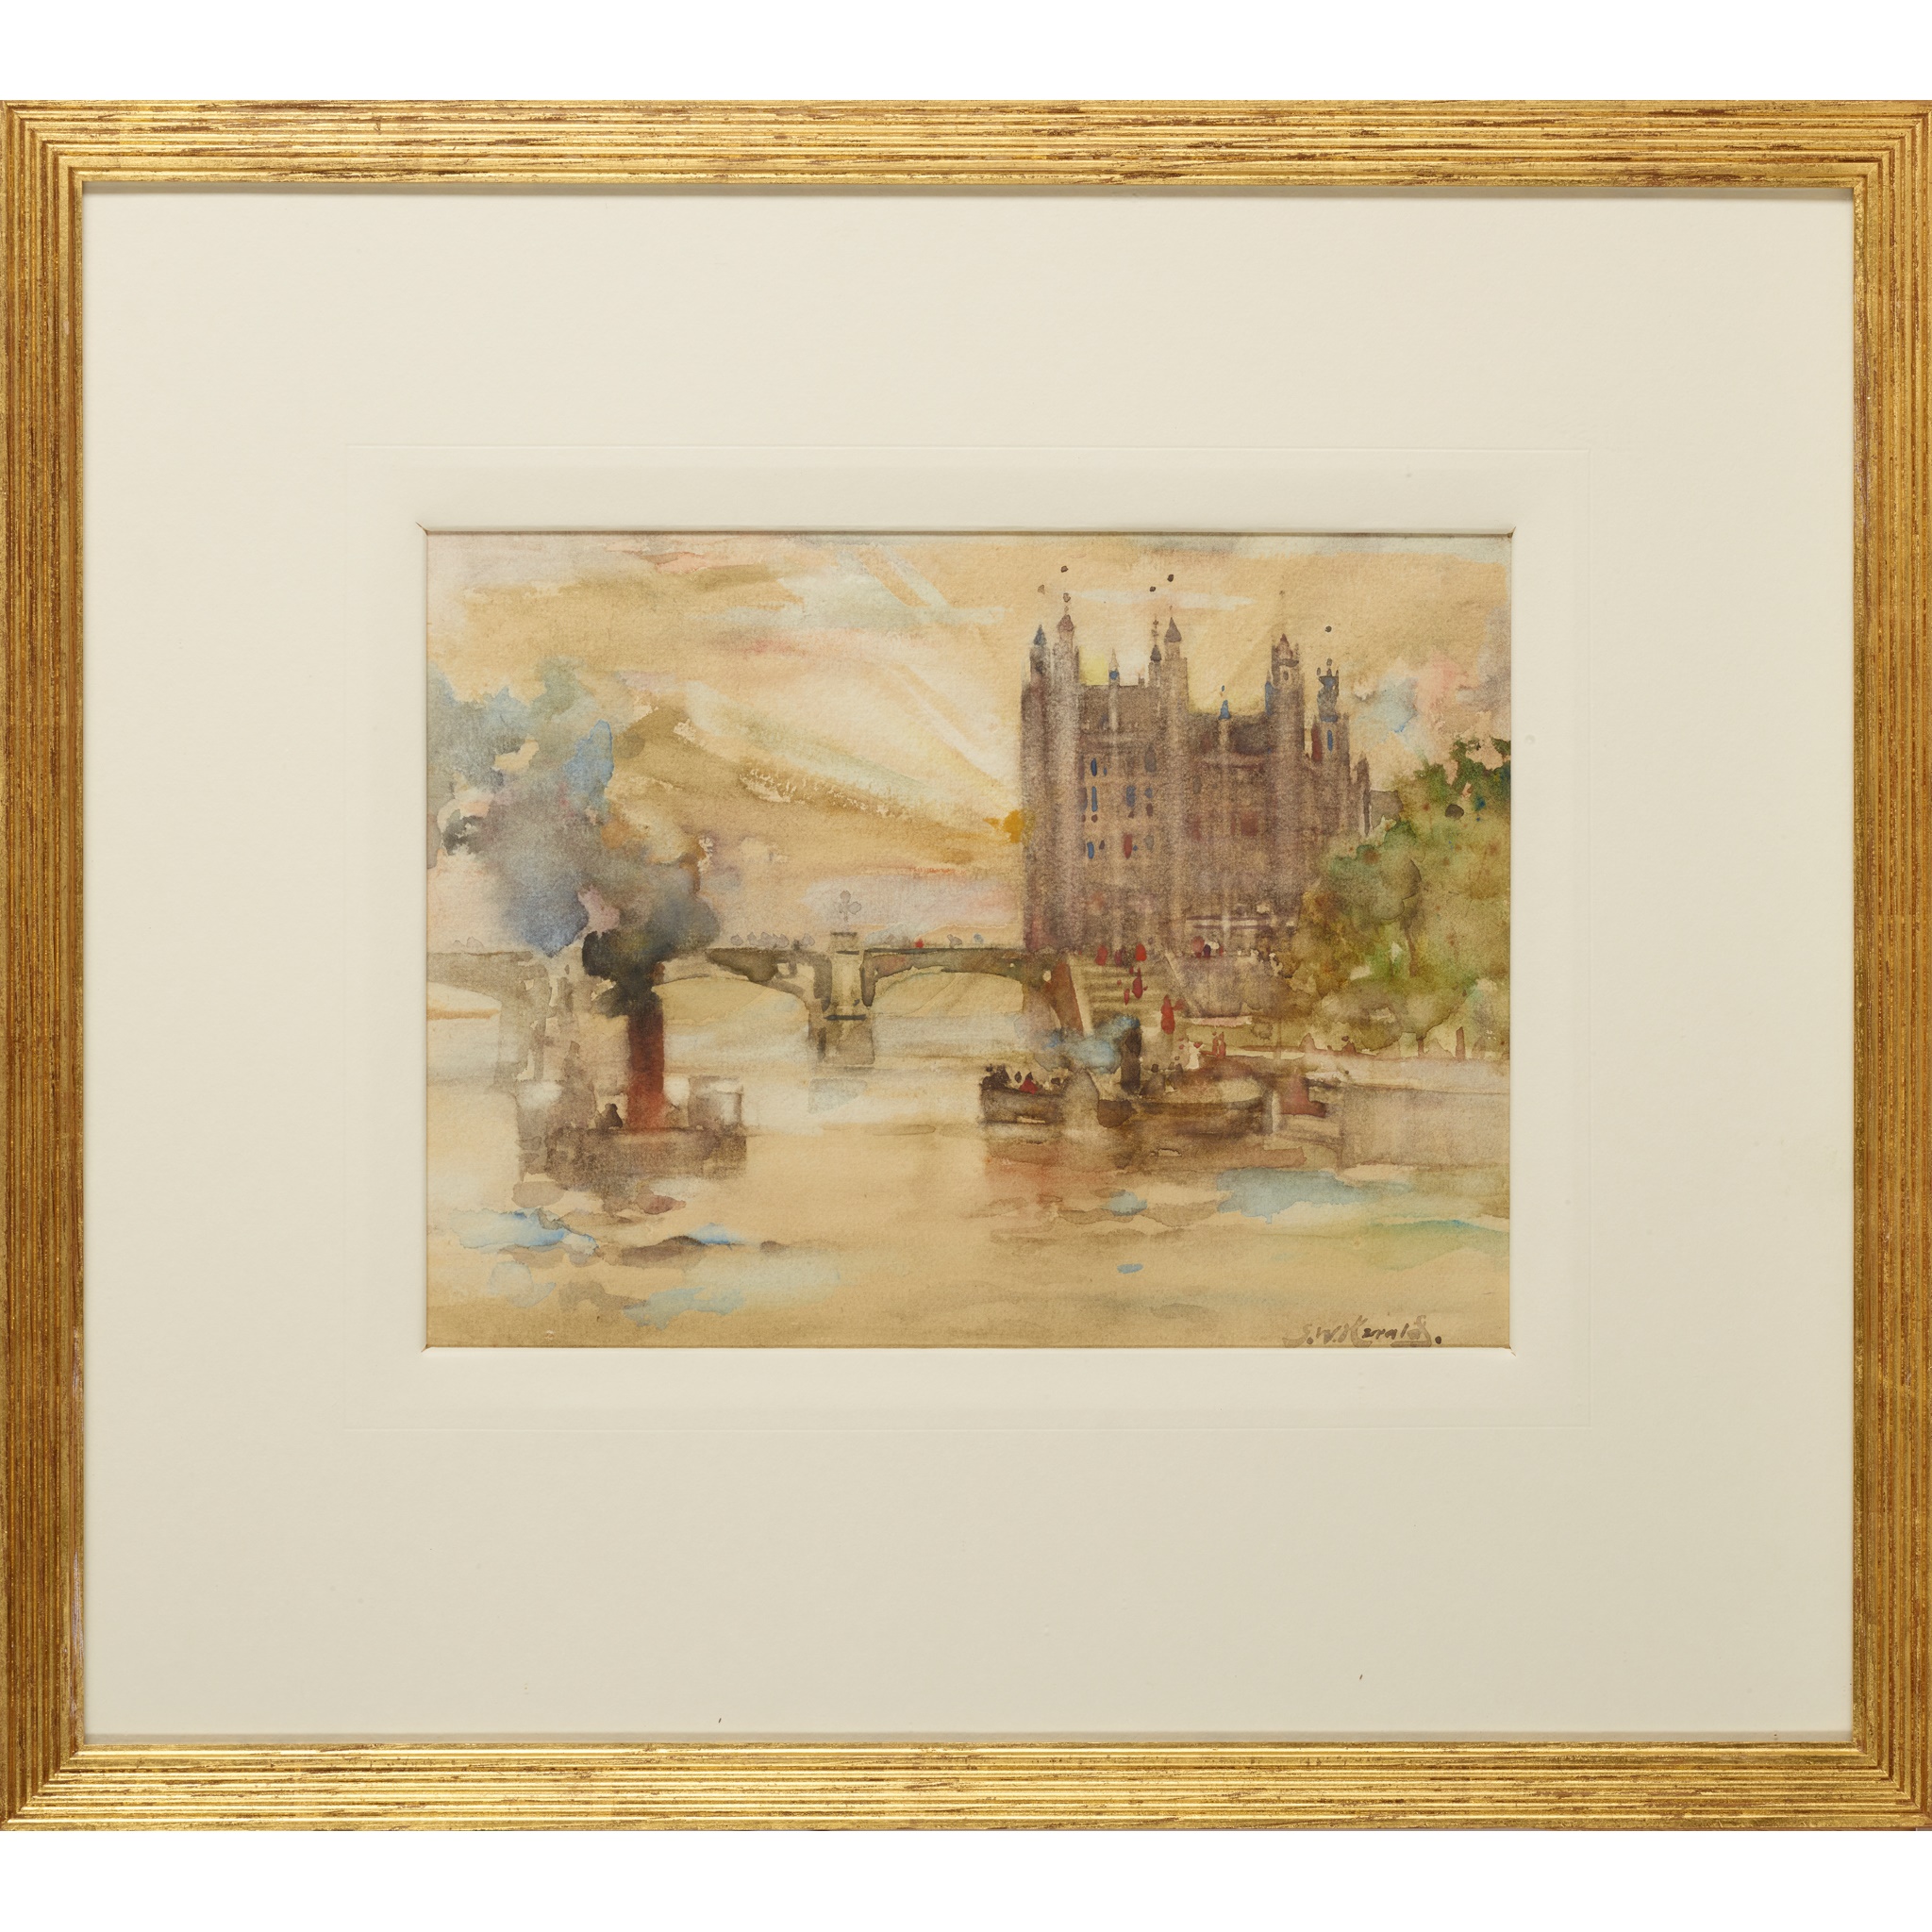 JAMES WATTERSTON HERALD (SCOTTISH 1859-1914) HOUSES OF PARLIAMENT FROM THE RIVER - Image 2 of 3